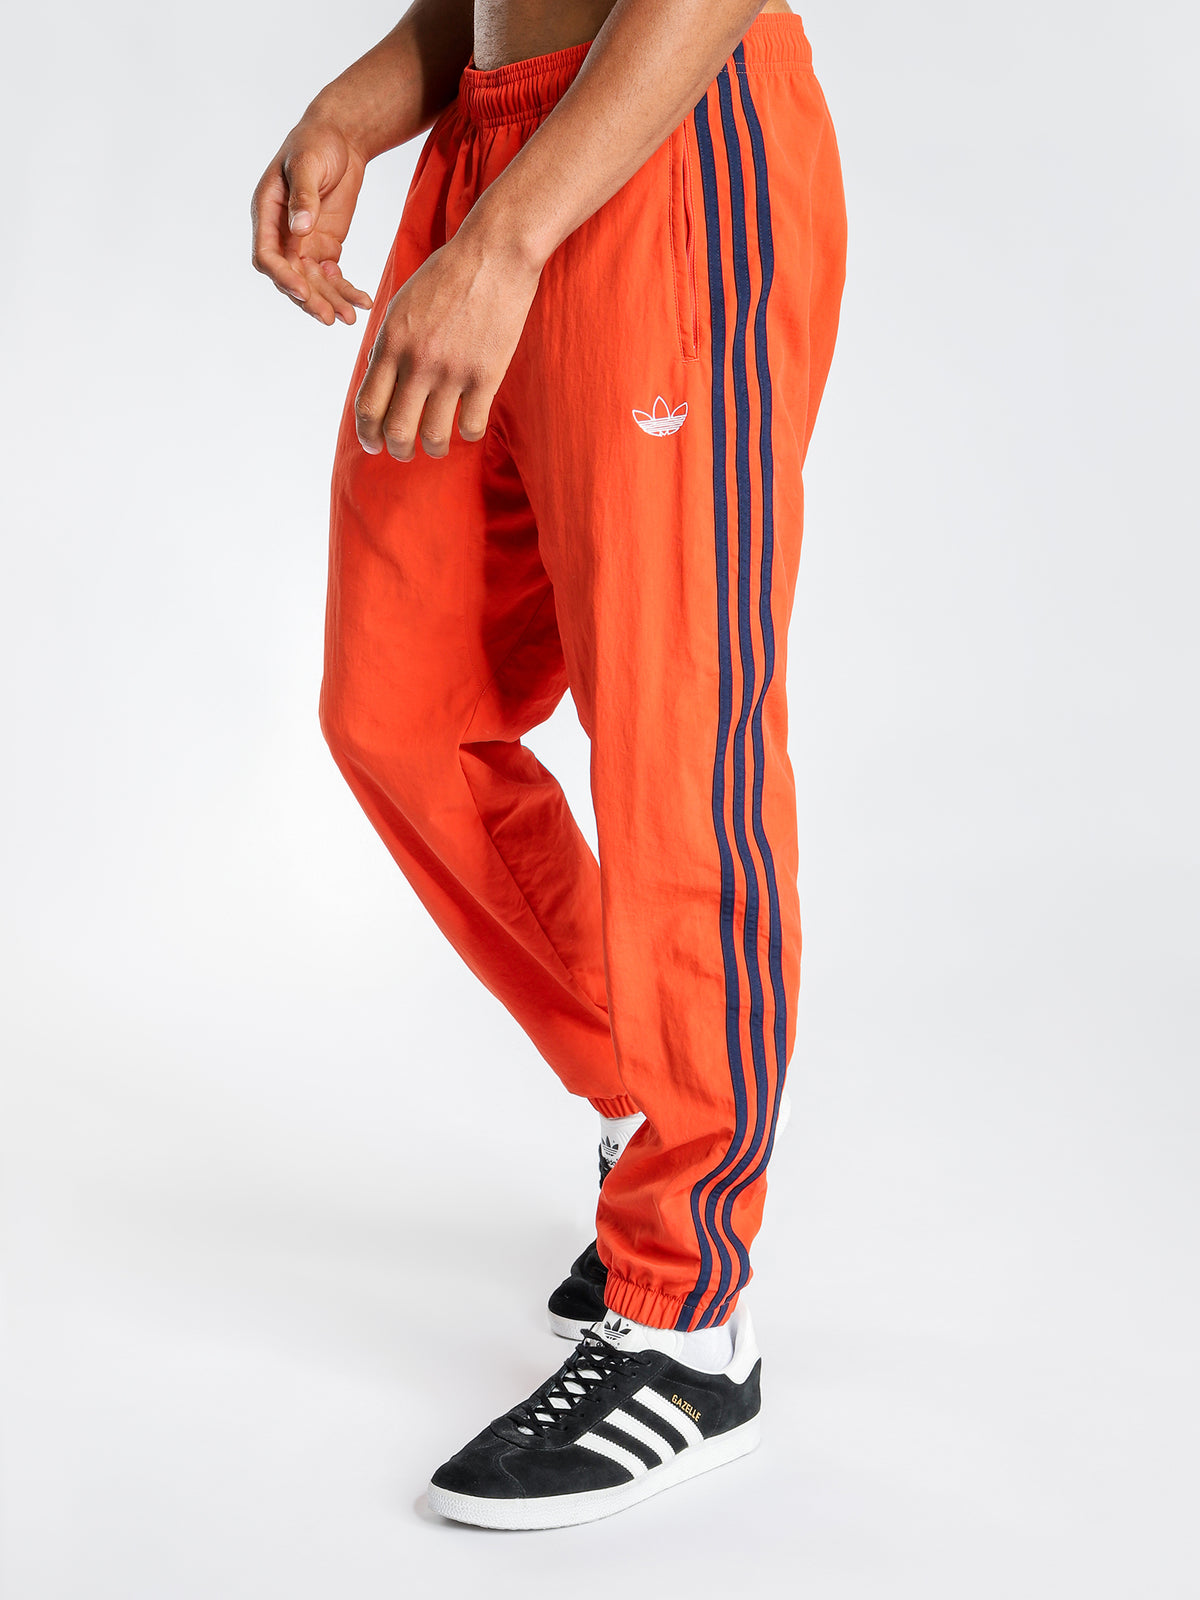 Woven 3 Stripe Tourney Warm Up Pants in Raw Amber